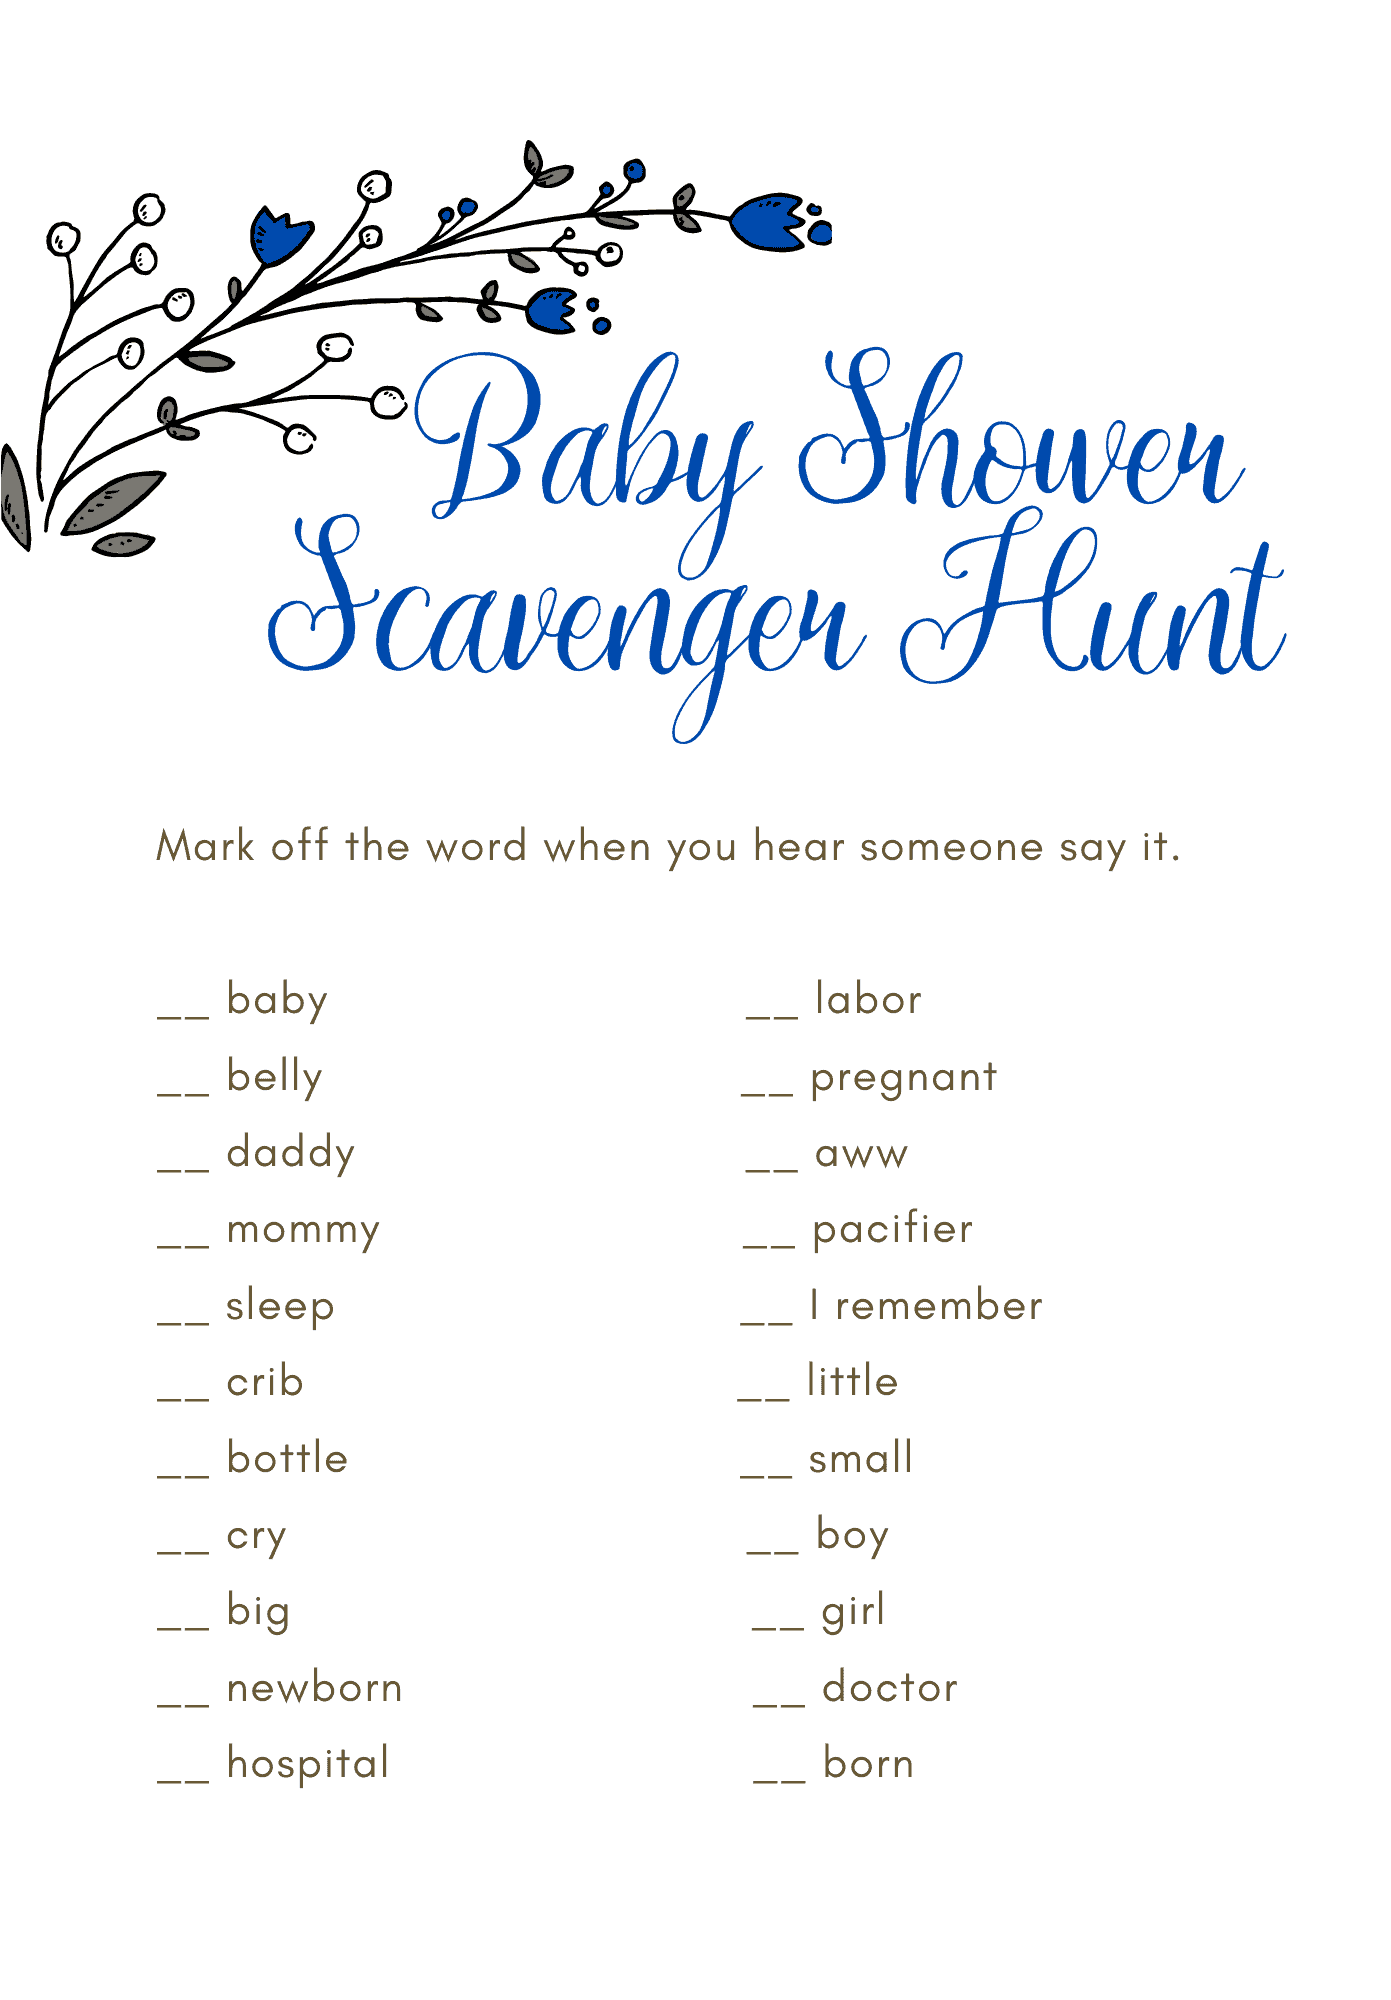 5 Baby Shower Scavenger Hunts Guests Will Love